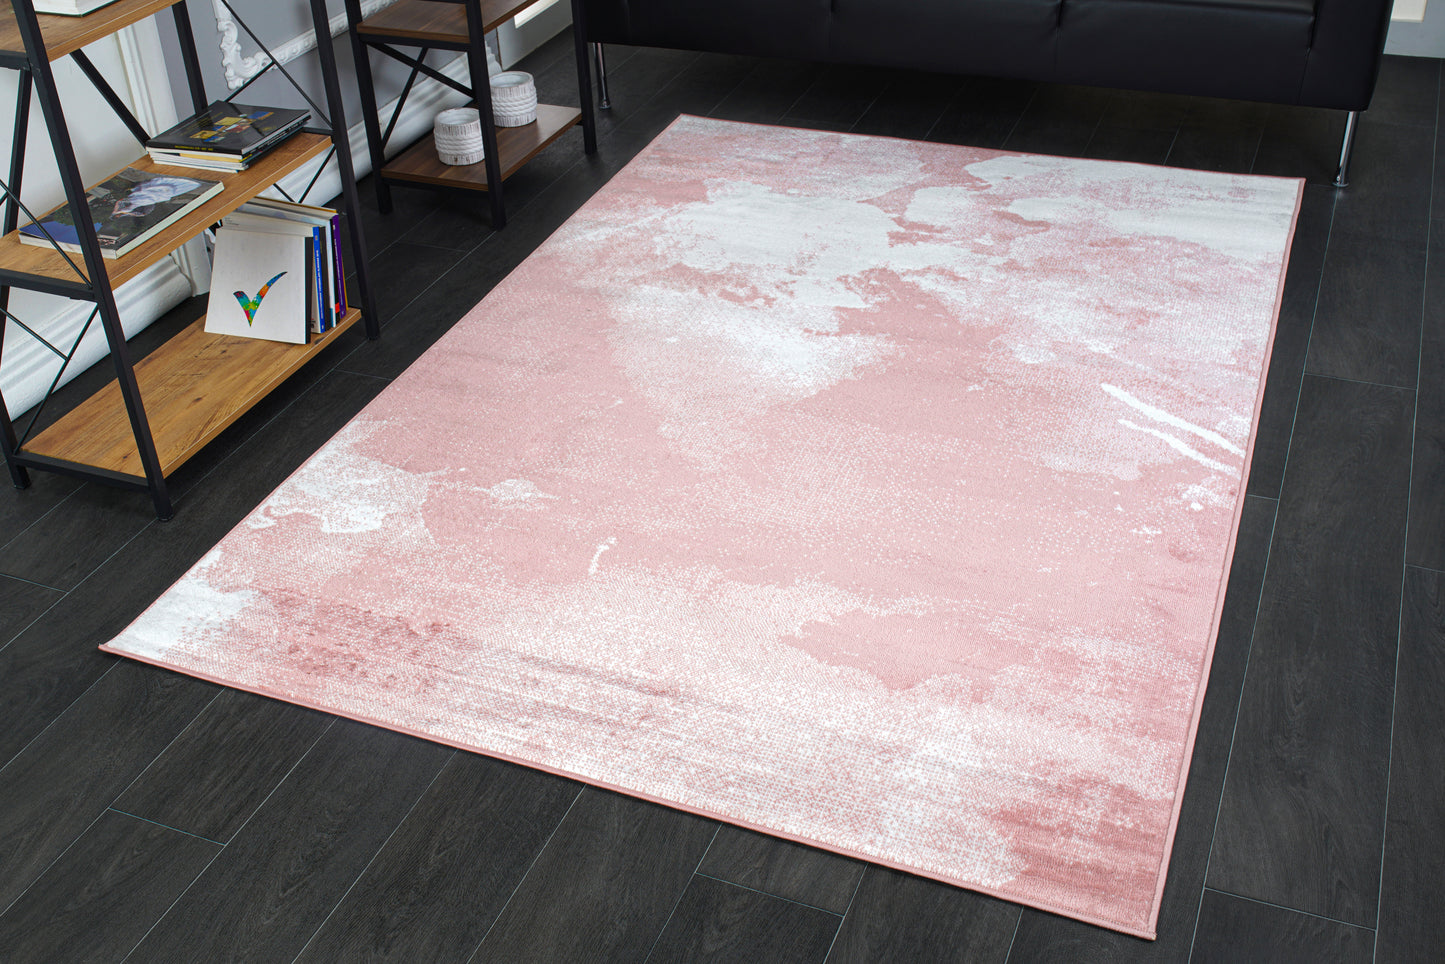 pink abstract rustic modern marble pattern area rug 4x6, 4x5 ft Small Carpet, Home Office, Living Room, Bedroom